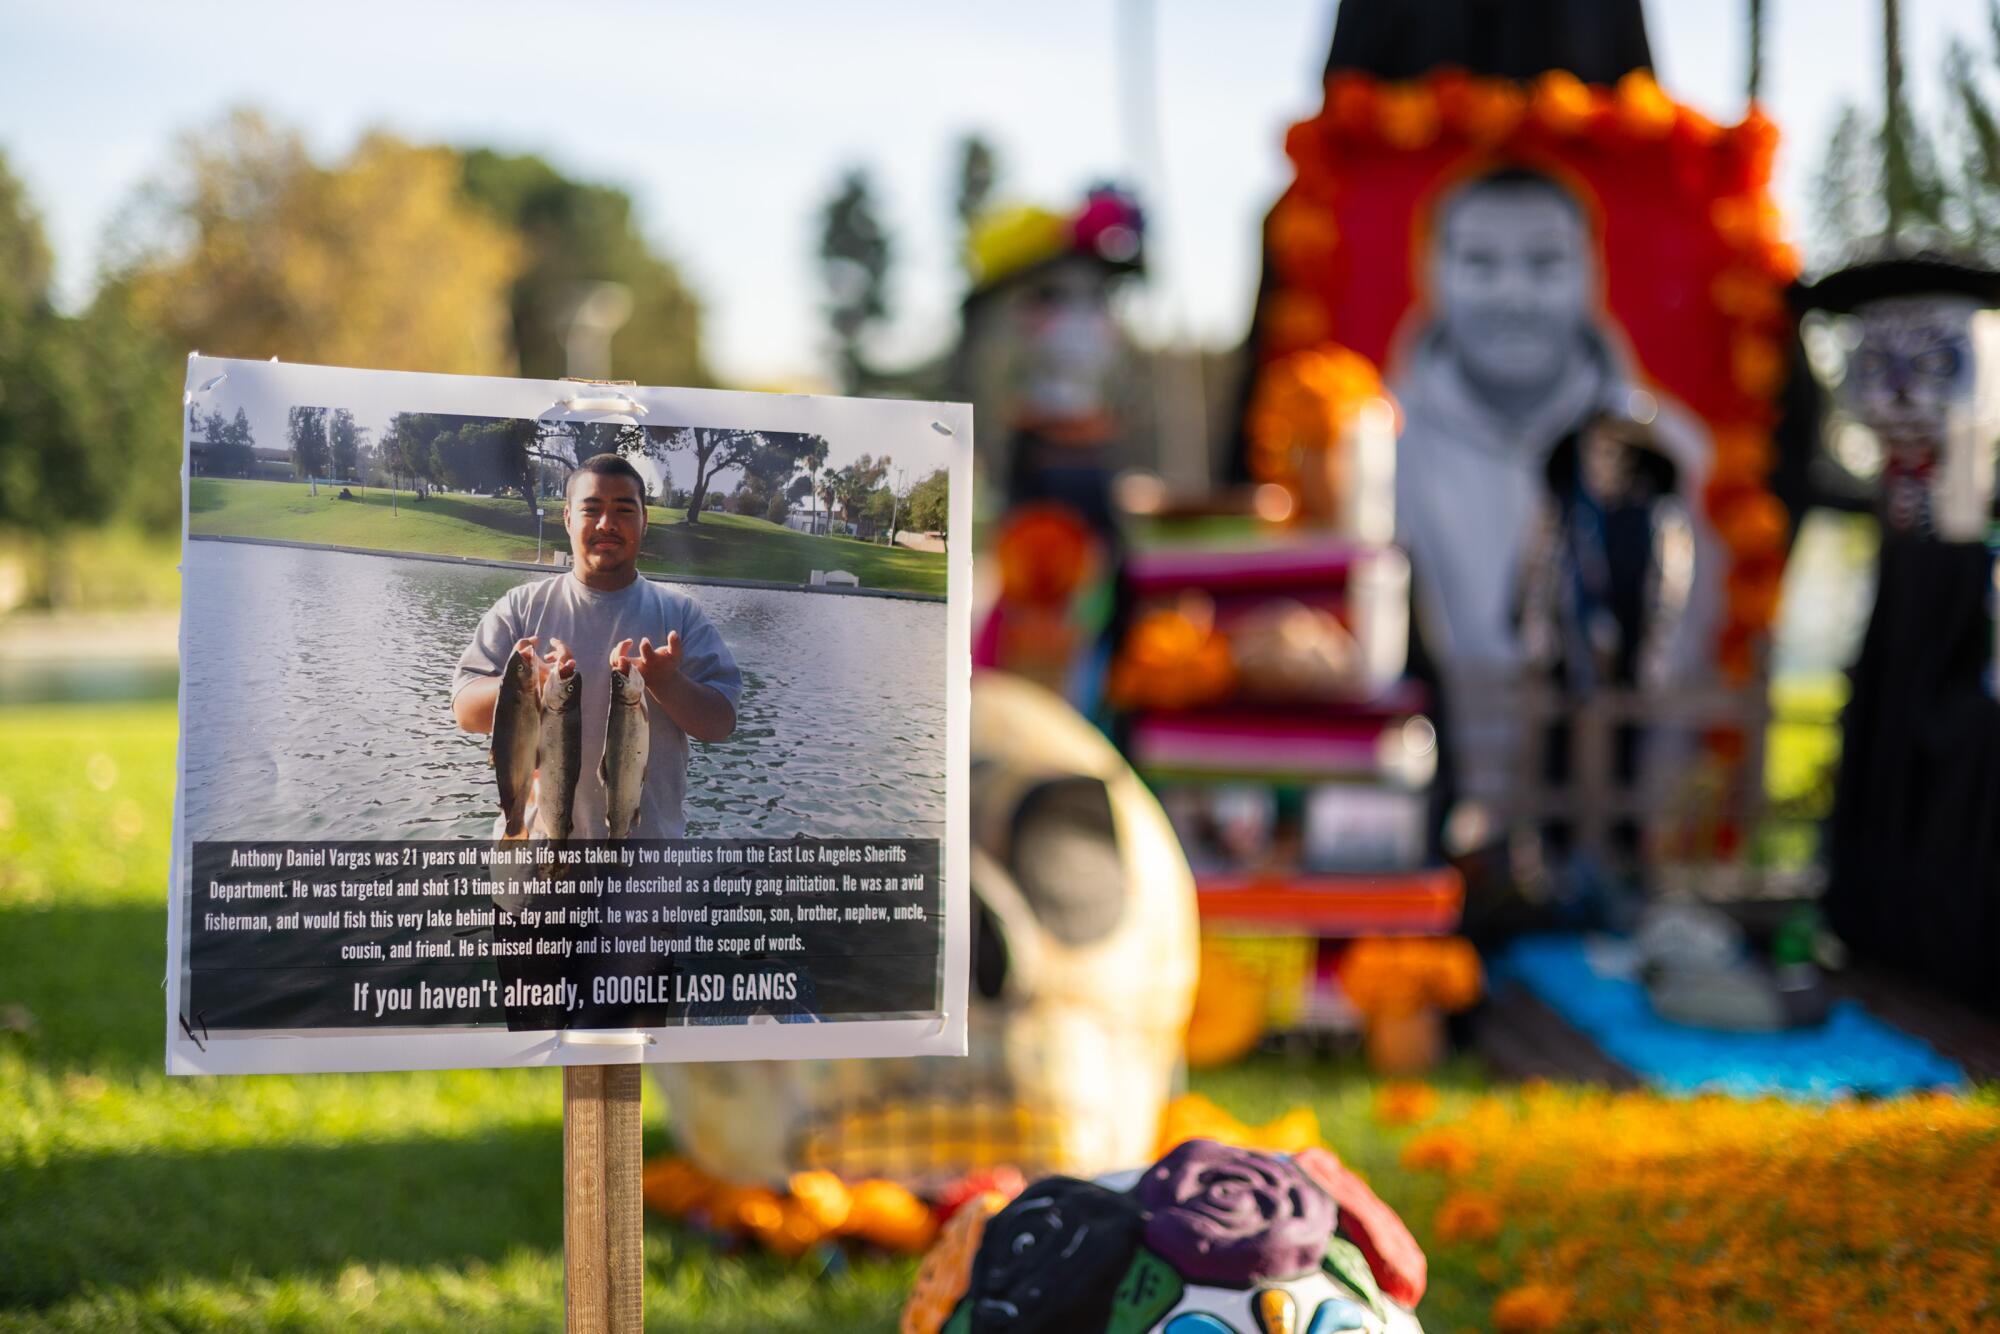 A photo of a man holding up two fish by a lake, in front of a Dia de los Muertos altar honoring him.